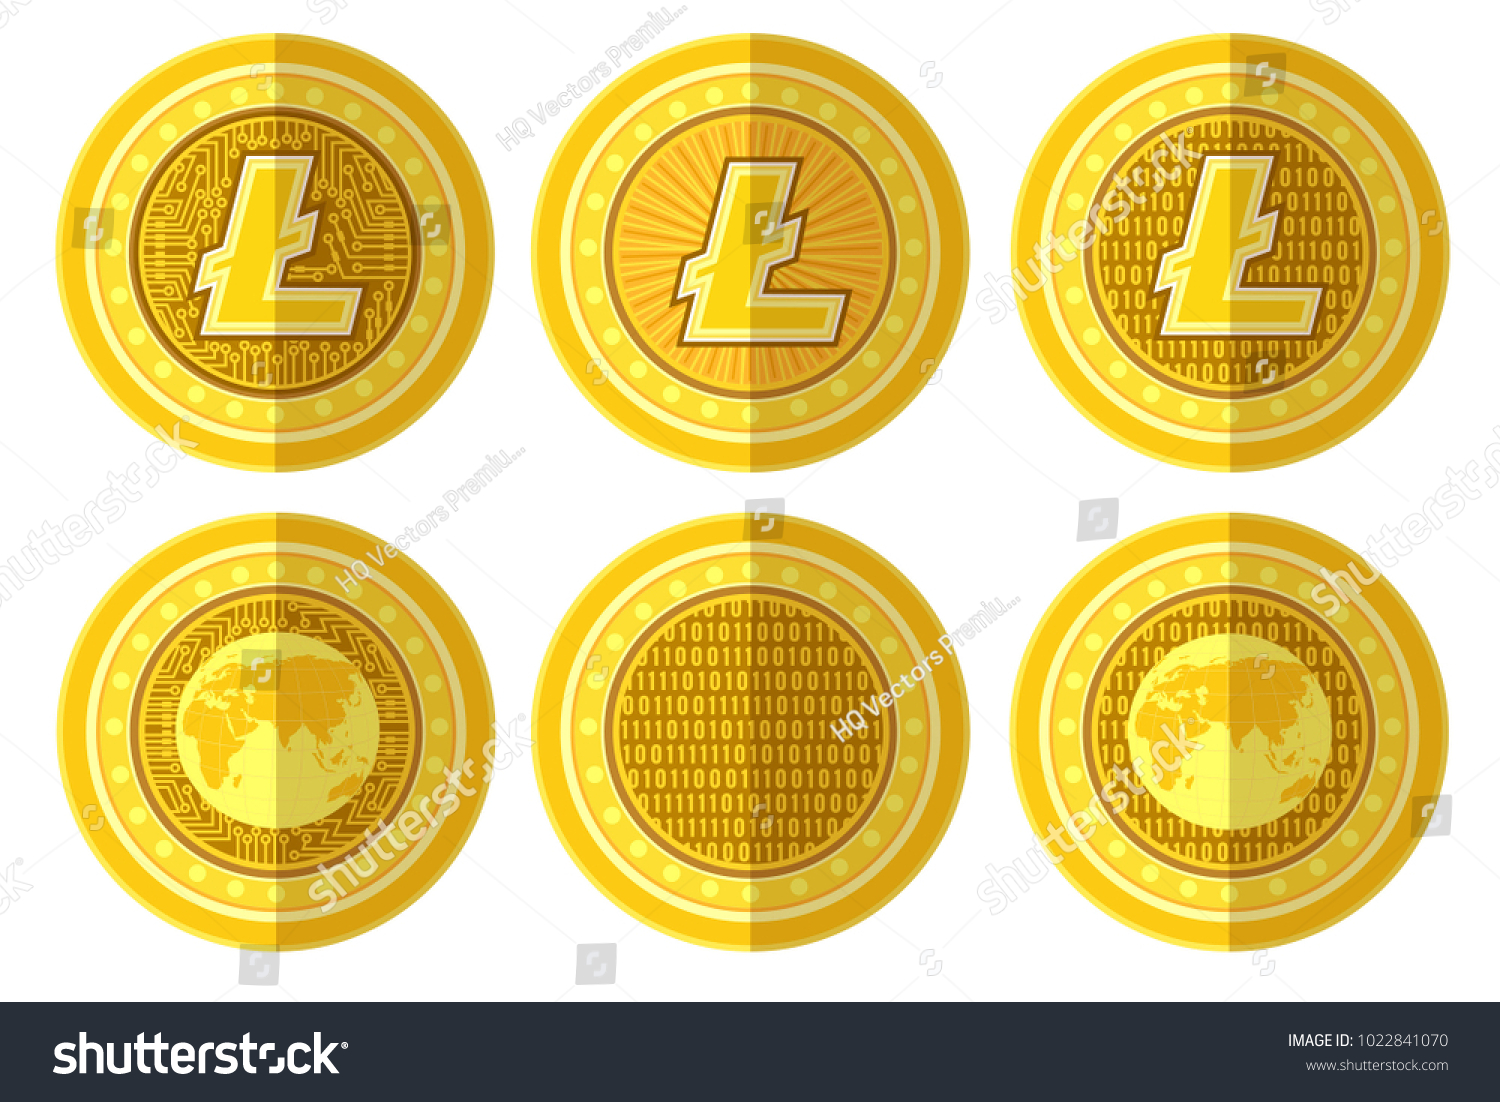 SVG of Set of flat golden coin with bitcoin litecoin ltc sign back and front side. Vector Illustration isolated on white background svg